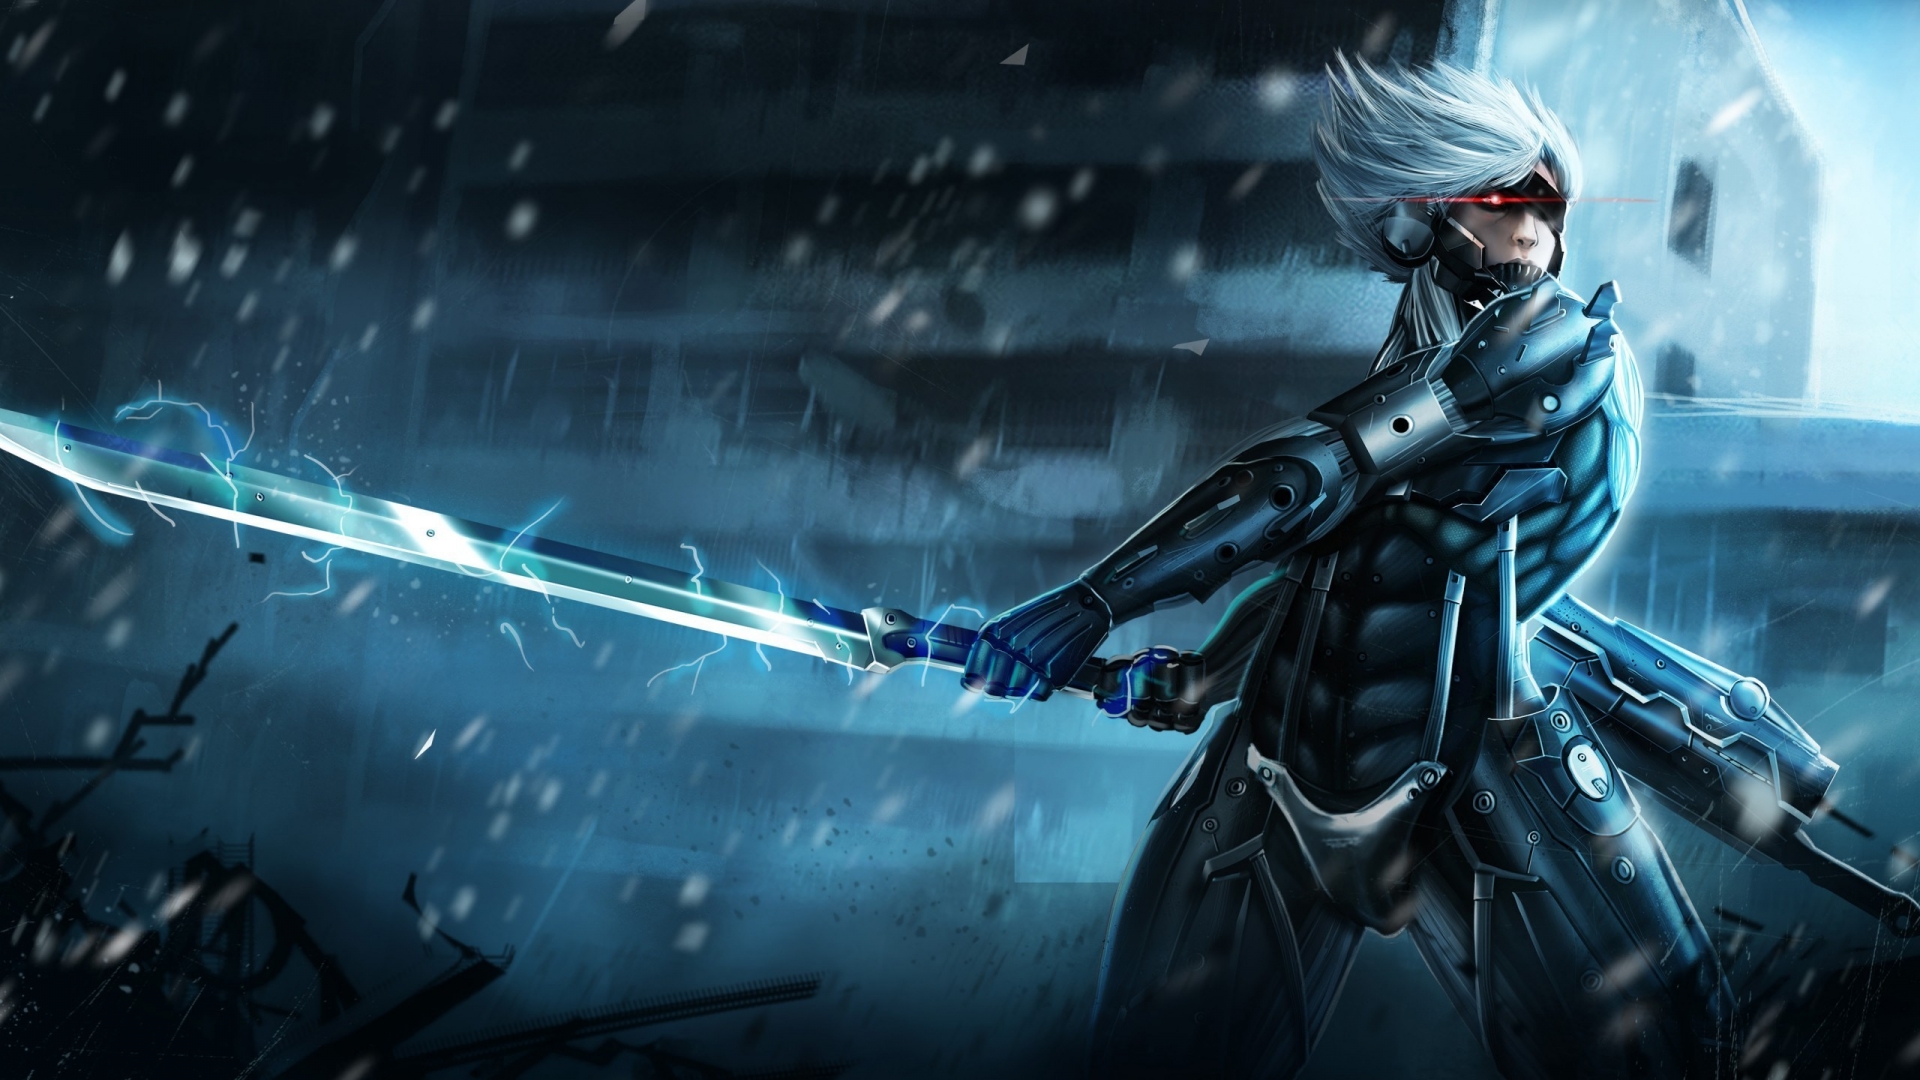 Metal Gear Rising for 1920 x 1080 HDTV 1080p resolution